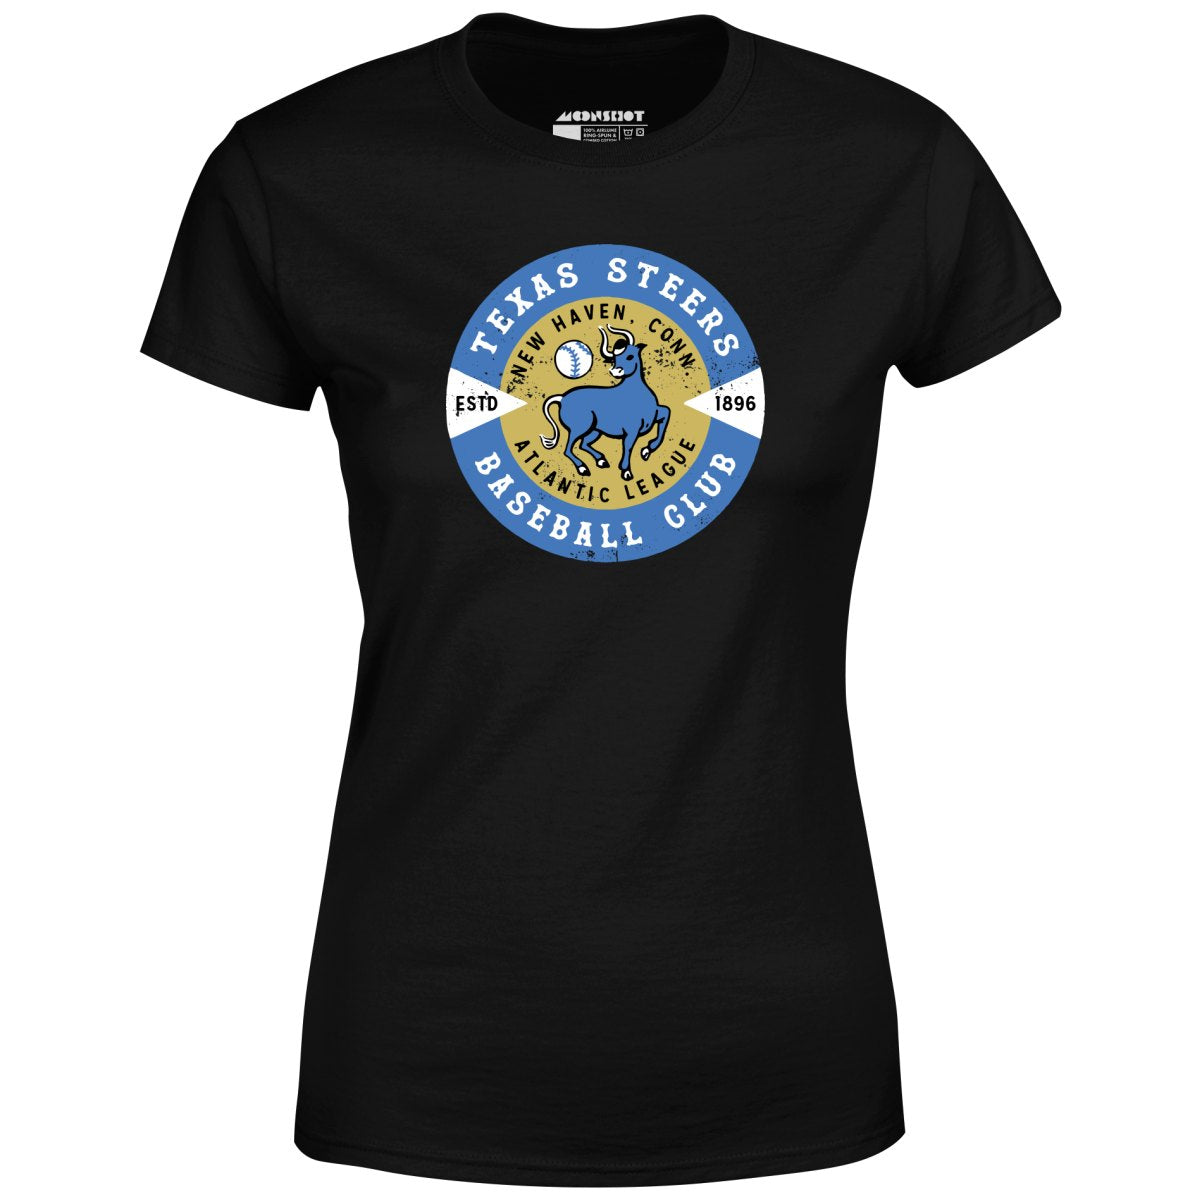 New Haven Texas Steers - Connecticut - Vintage Defunct Baseball Teams - Women's T-Shirt